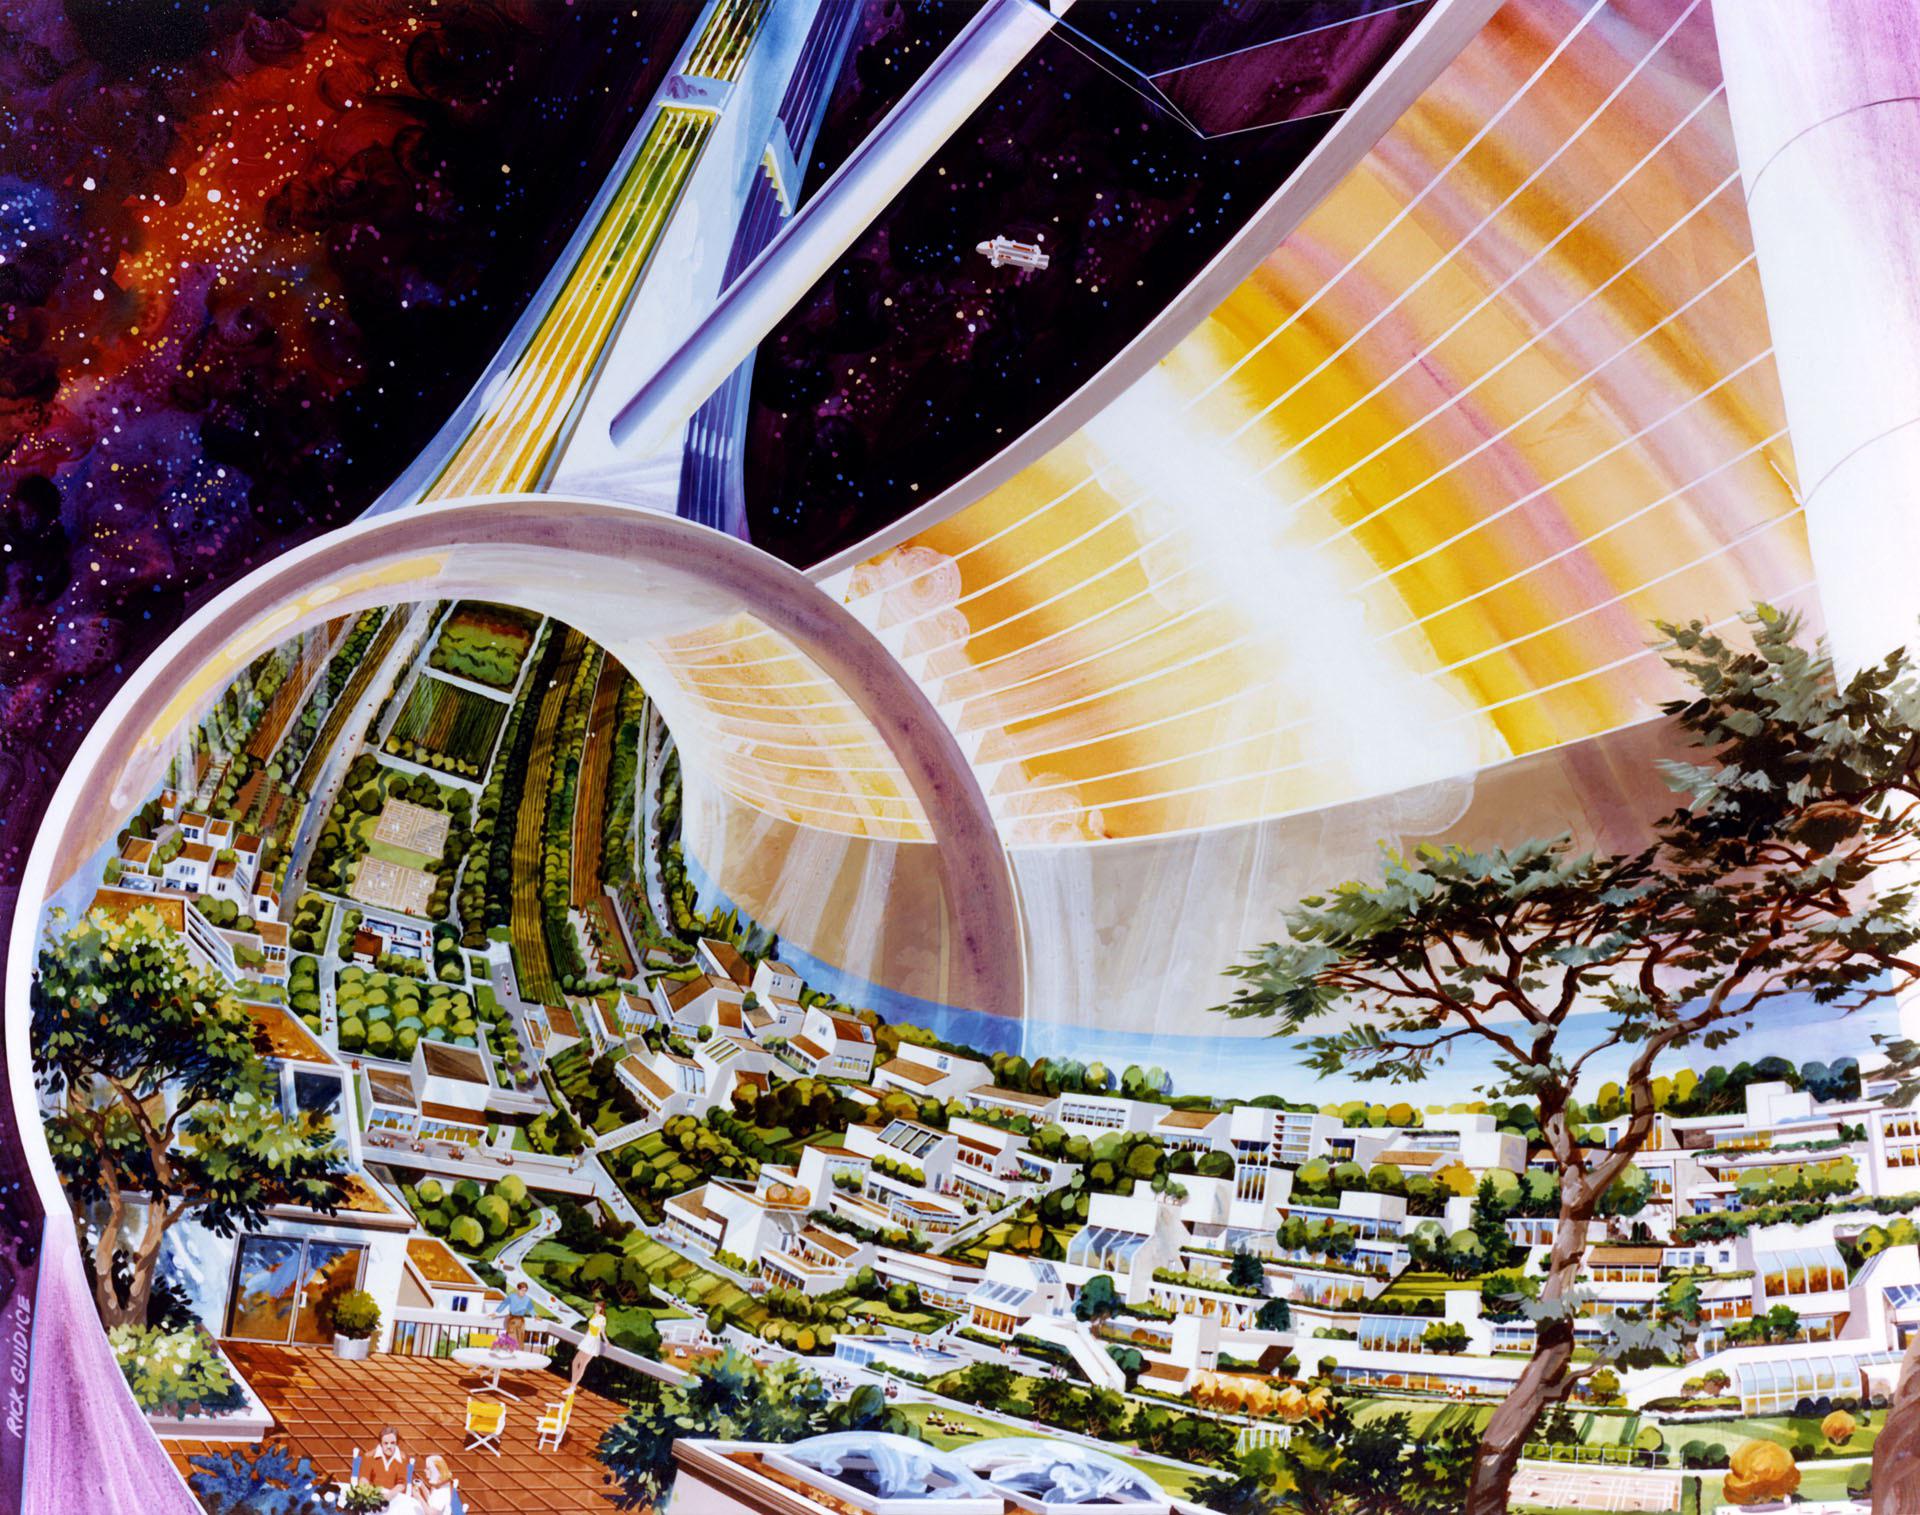 NASA envisioned Torodial Space Colonies in the 1970's, population circa 10,000.